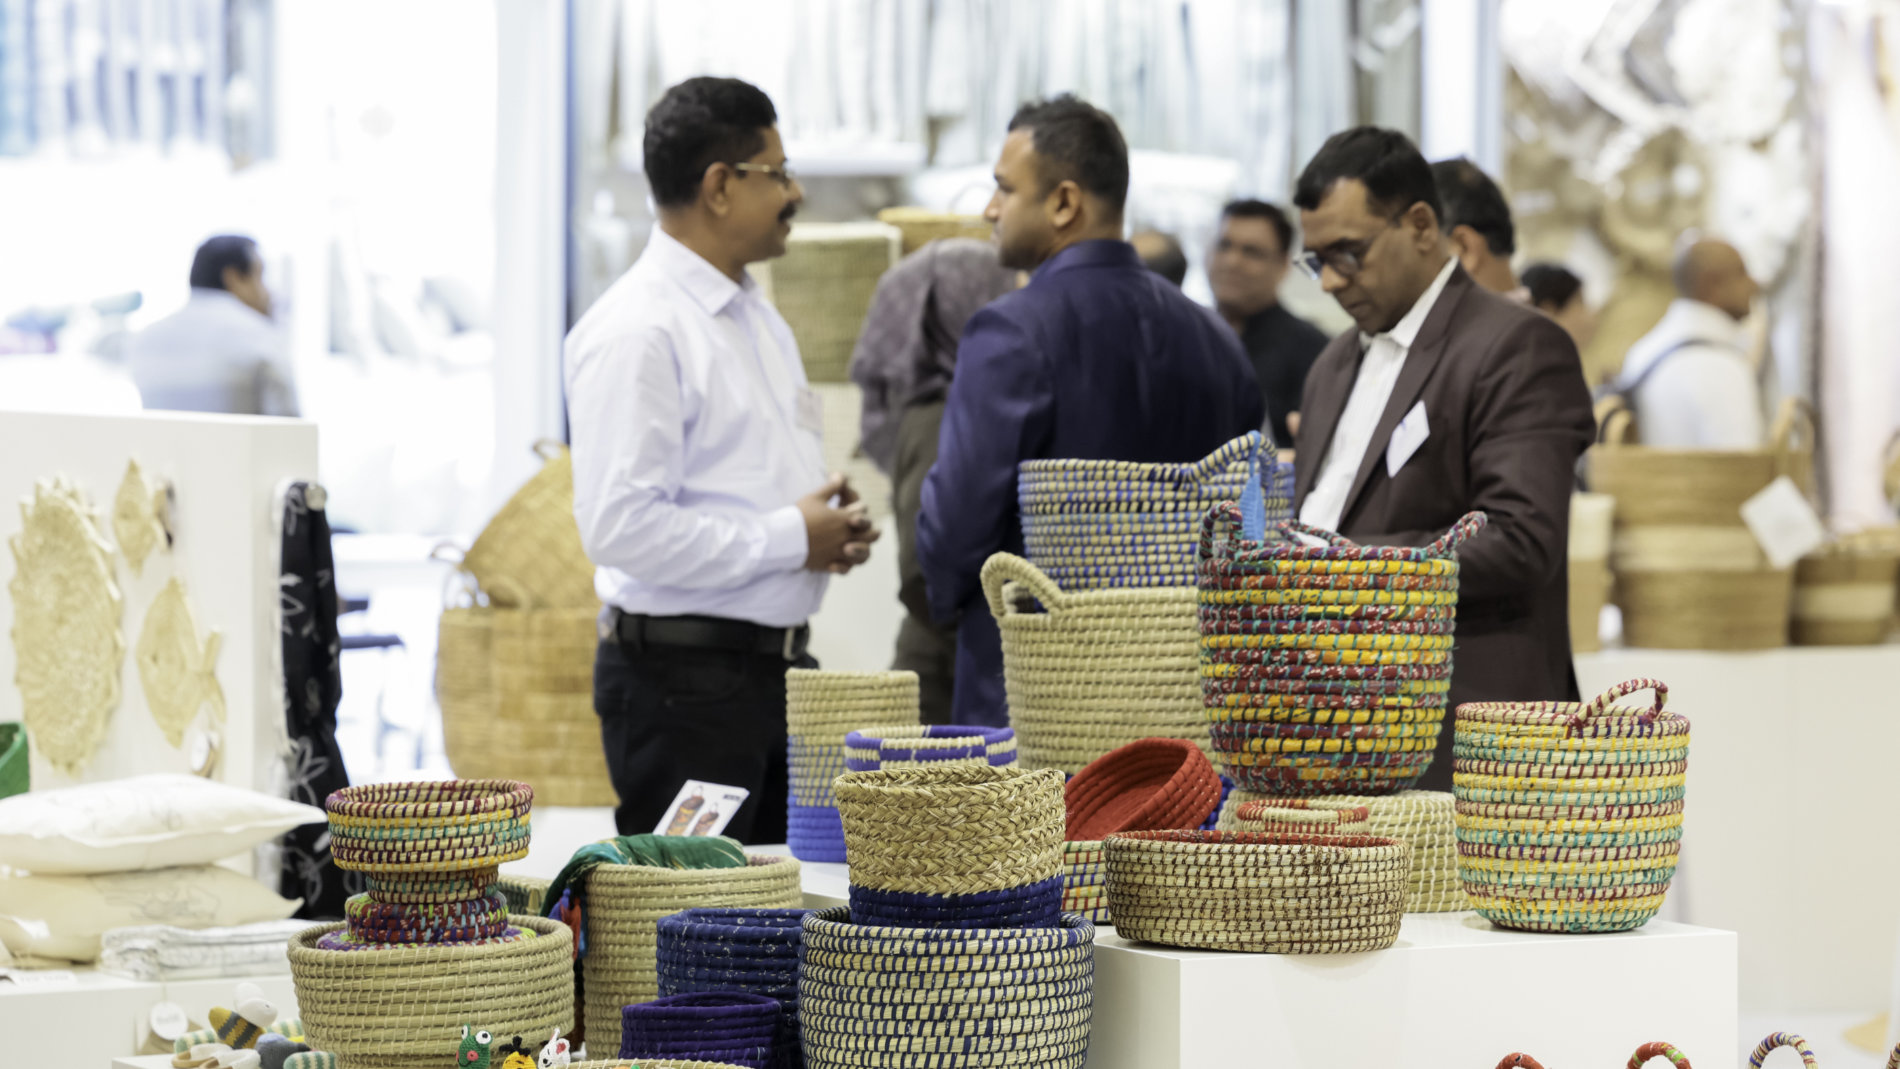 Men at Ambiente in the Global Sourcing area